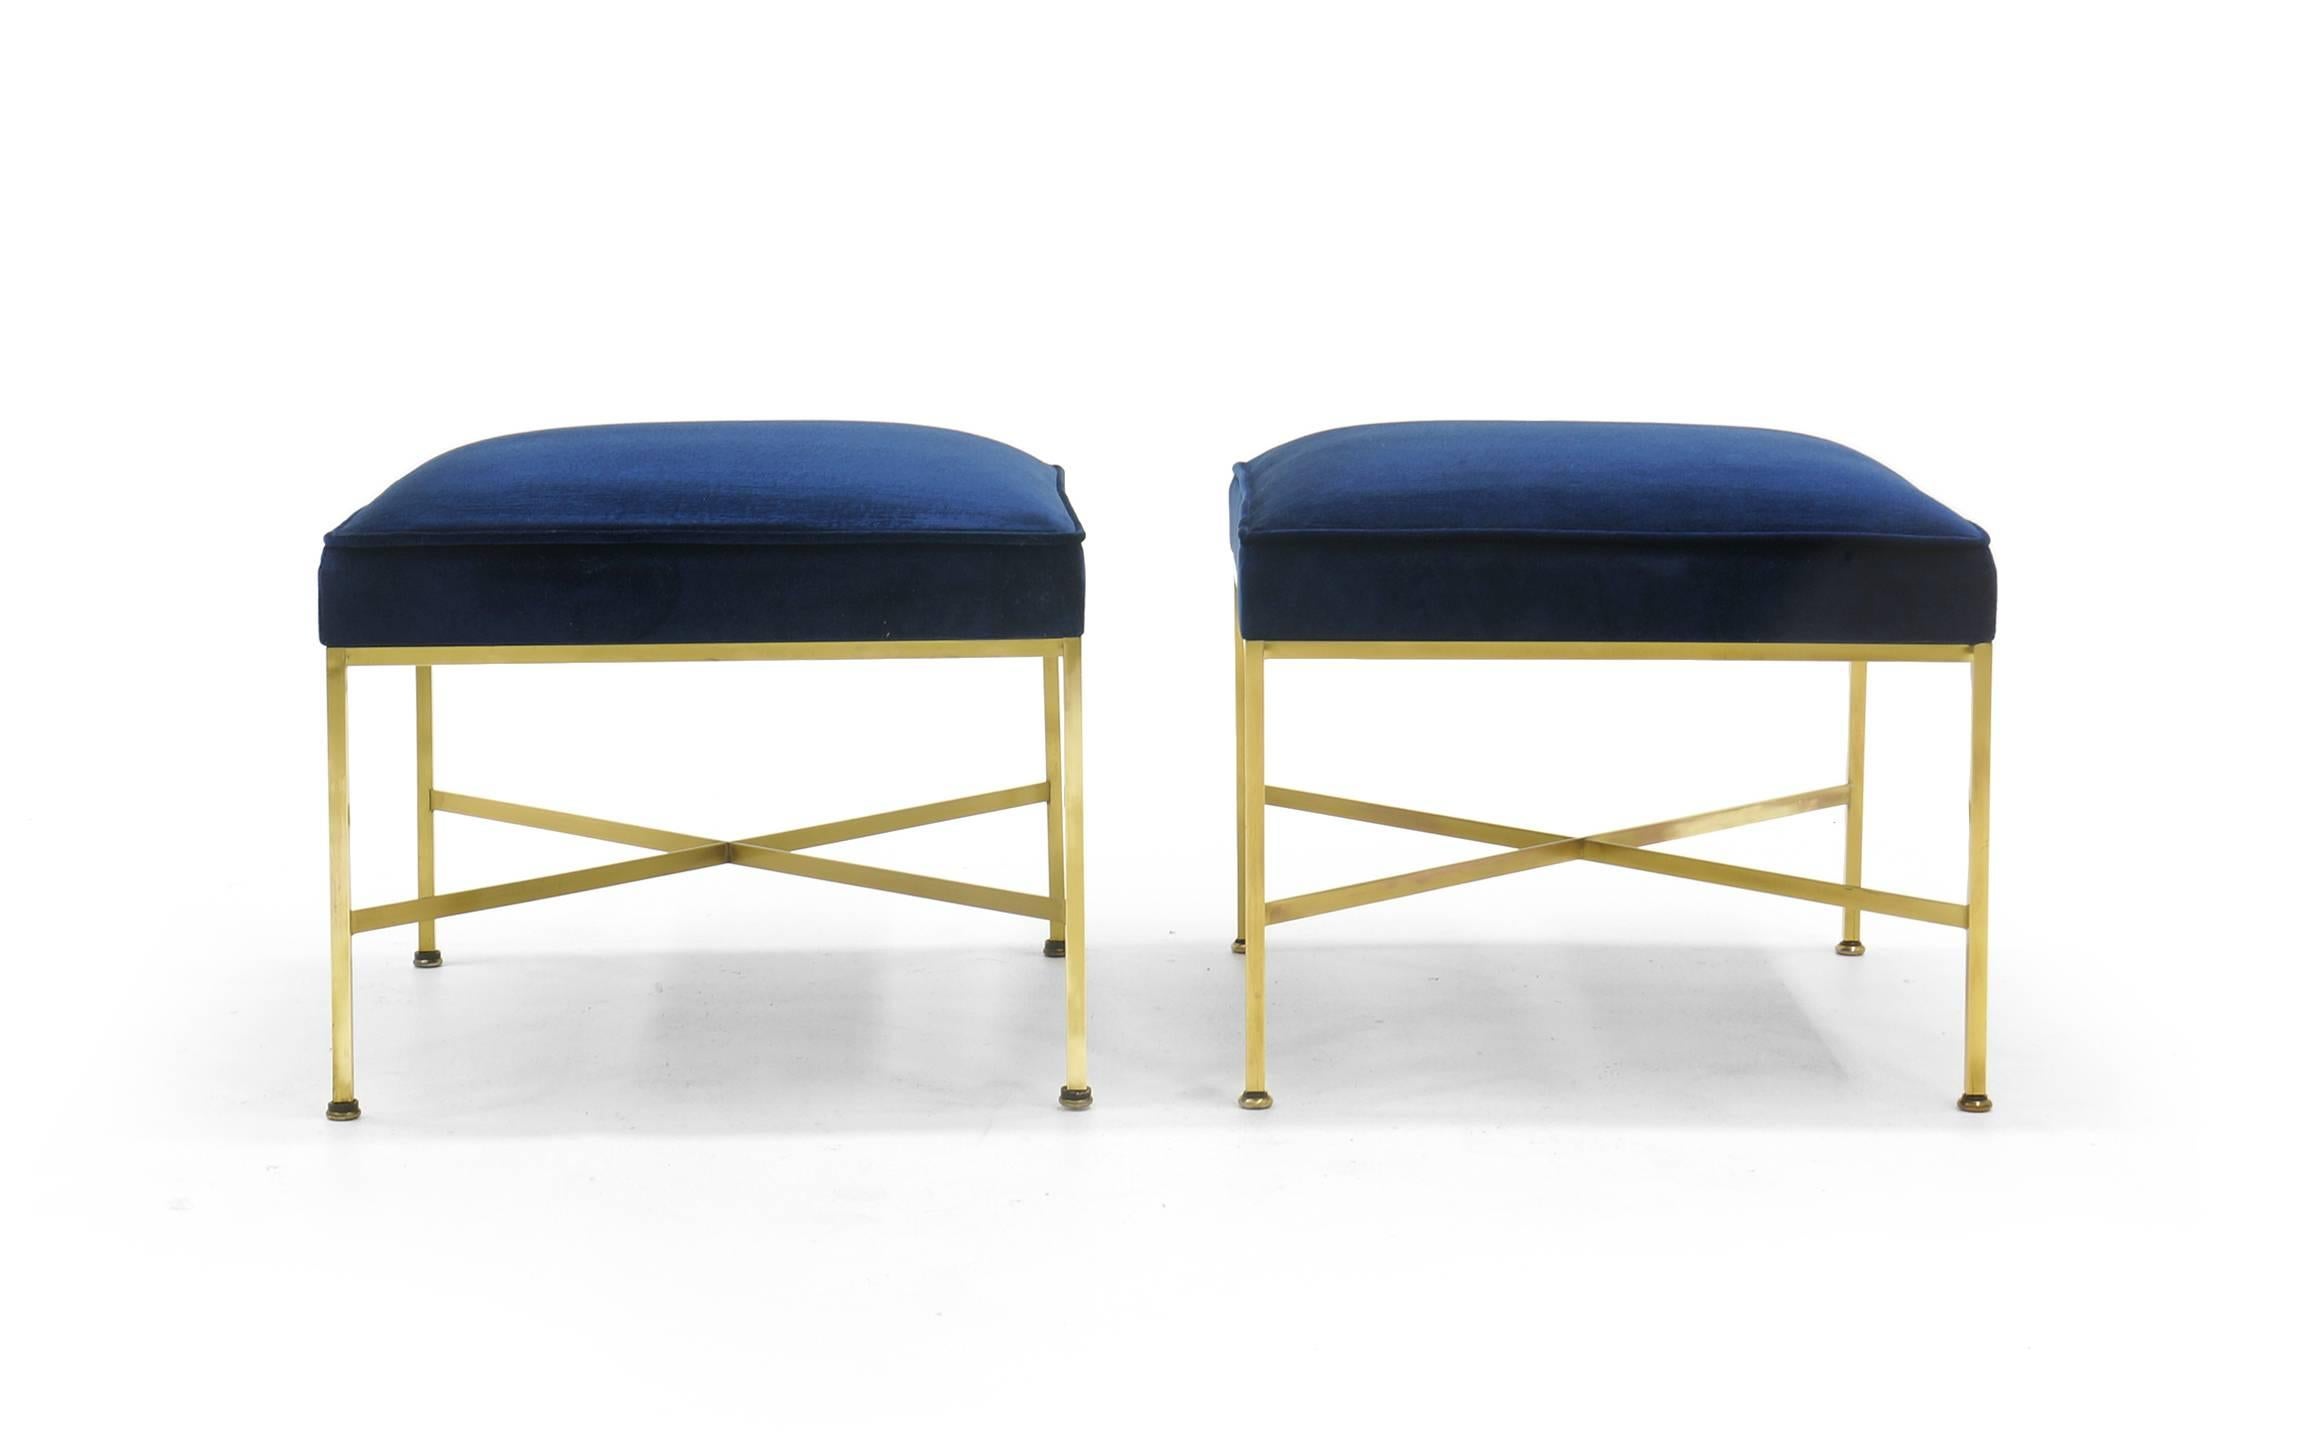 Pair of Paul McCobb for Calvin X-base stools benches with new deep blue wool velvet upholstery. The solid brass square tubing is polished to a beautiful luster. These are excellent examples of this design.